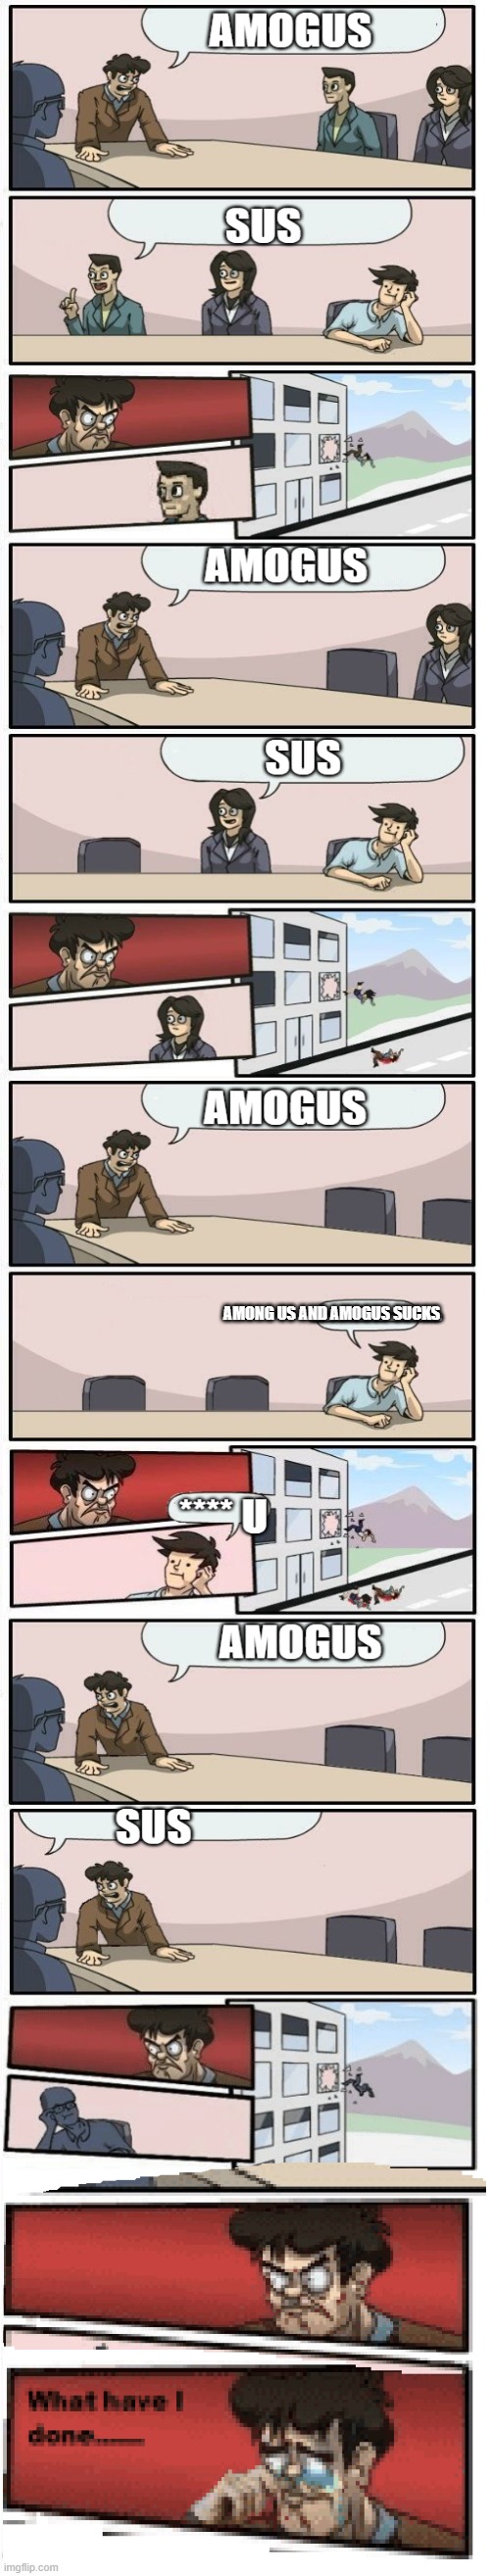 XDDDDDDDDDDDDDDDDDDDDDDDDDDDDDDDDDDDDDDDDDDD | AMONG US AND AMOGUS SUCKS | image tagged in amogus,among us,boardroom meeting suggestion | made w/ Imgflip meme maker